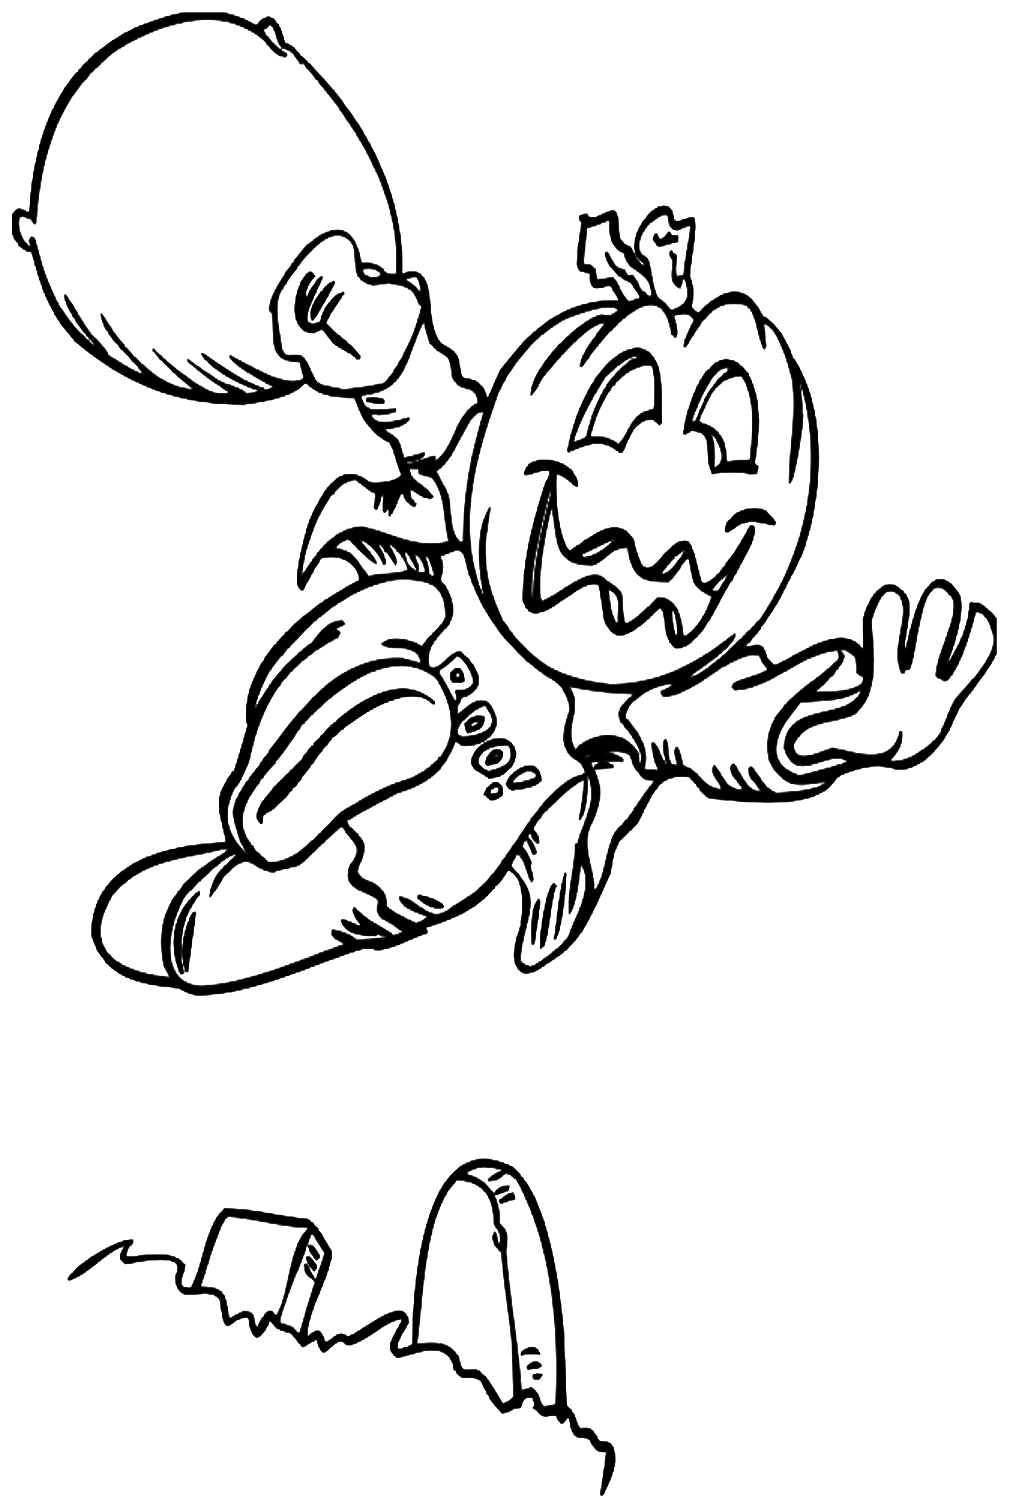 A Pumpkin Headed Kid Trick-Or-Treating Coloring Pages